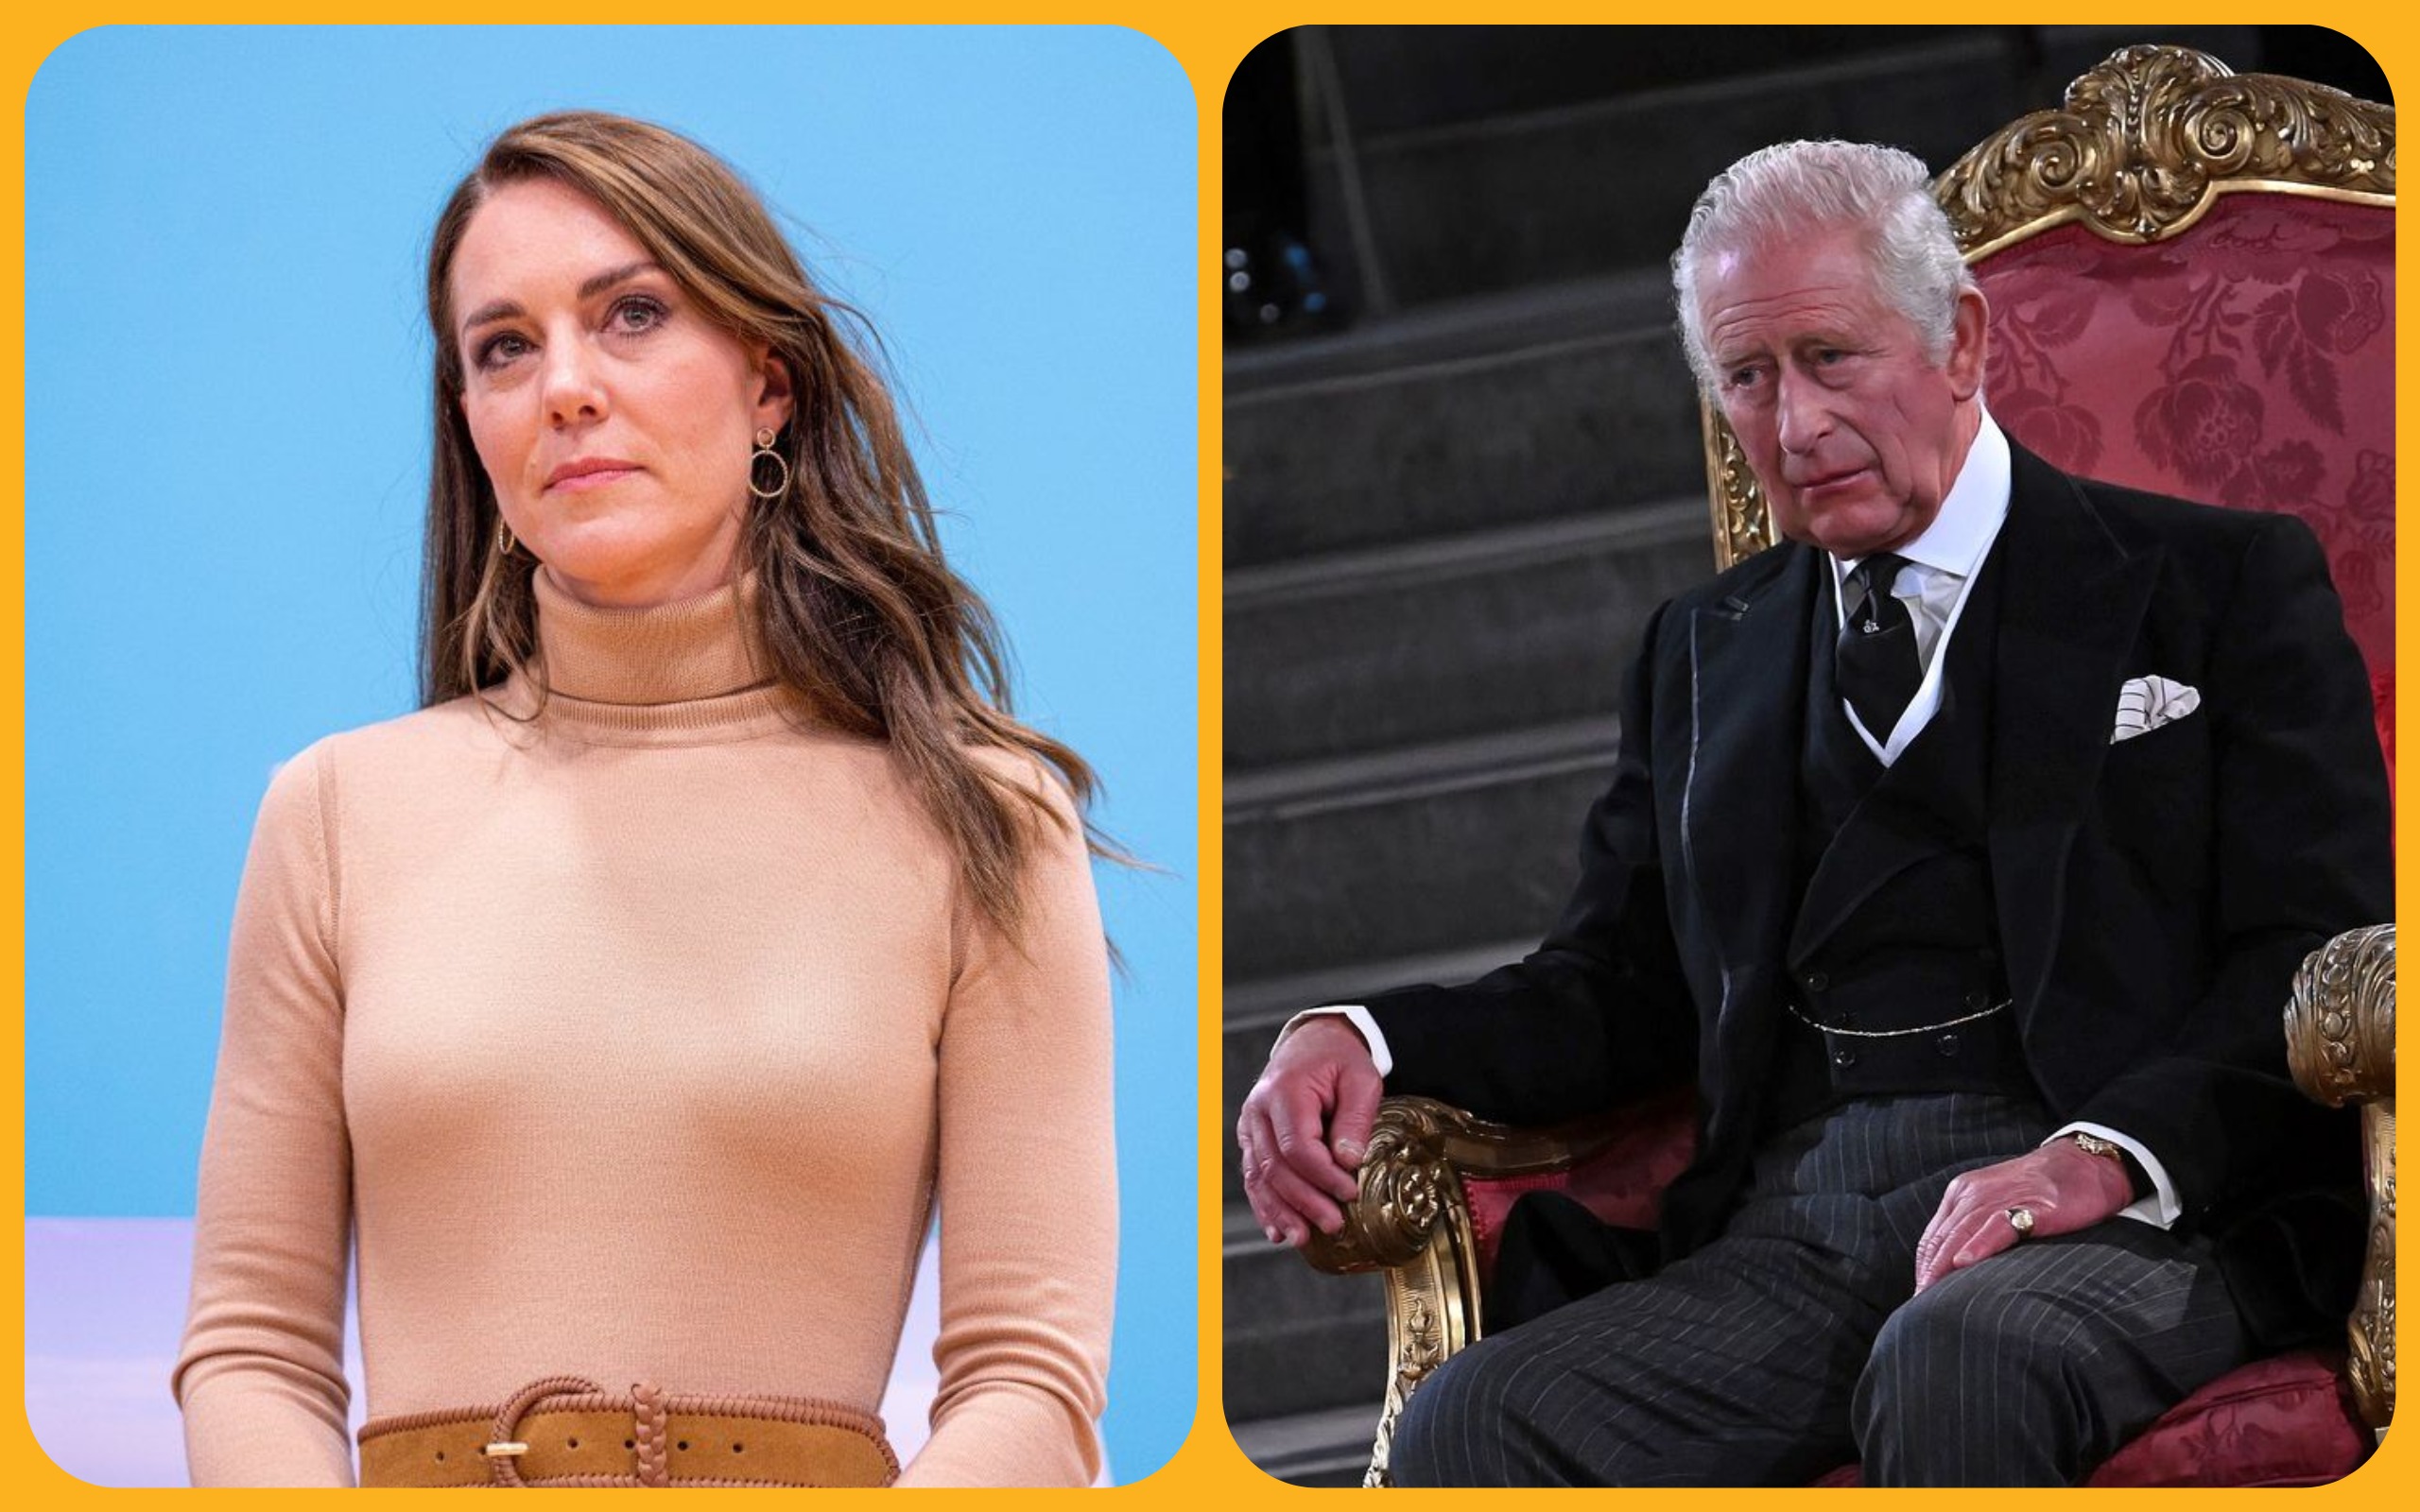 King Charles "So Proud" of Kate Middleton's Strength in Cancer Battle